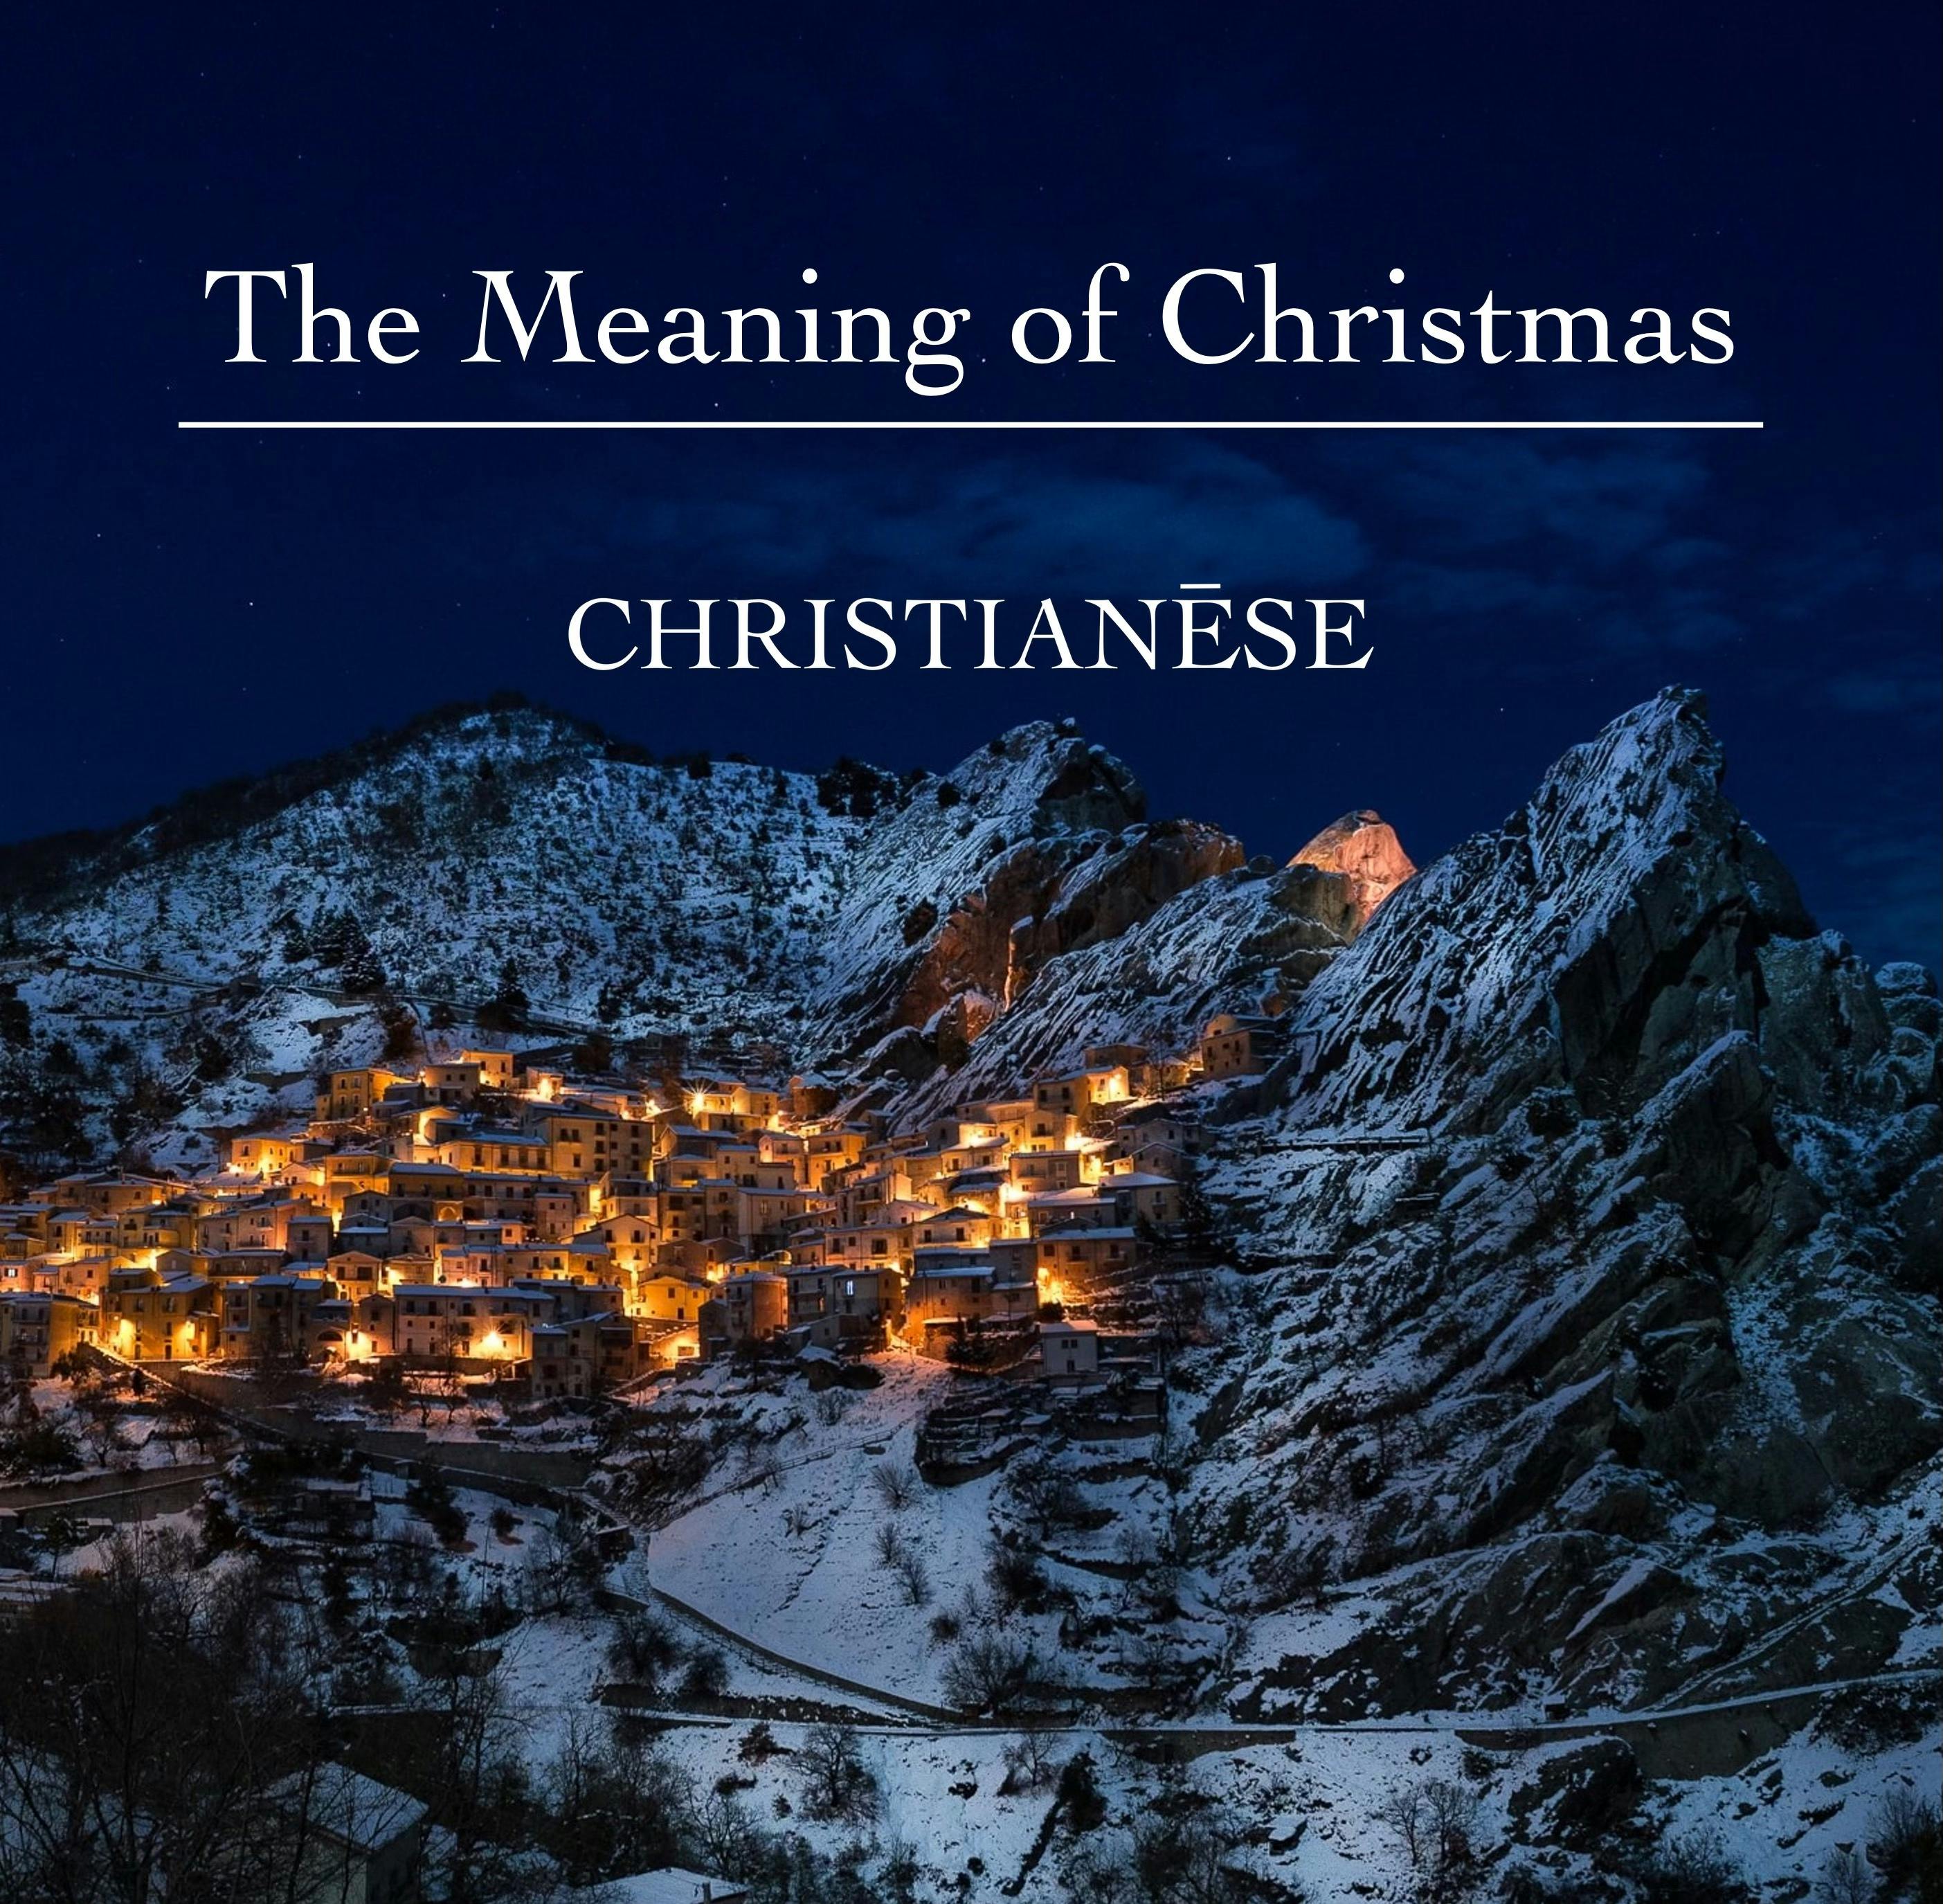 The Meaning of Christmas